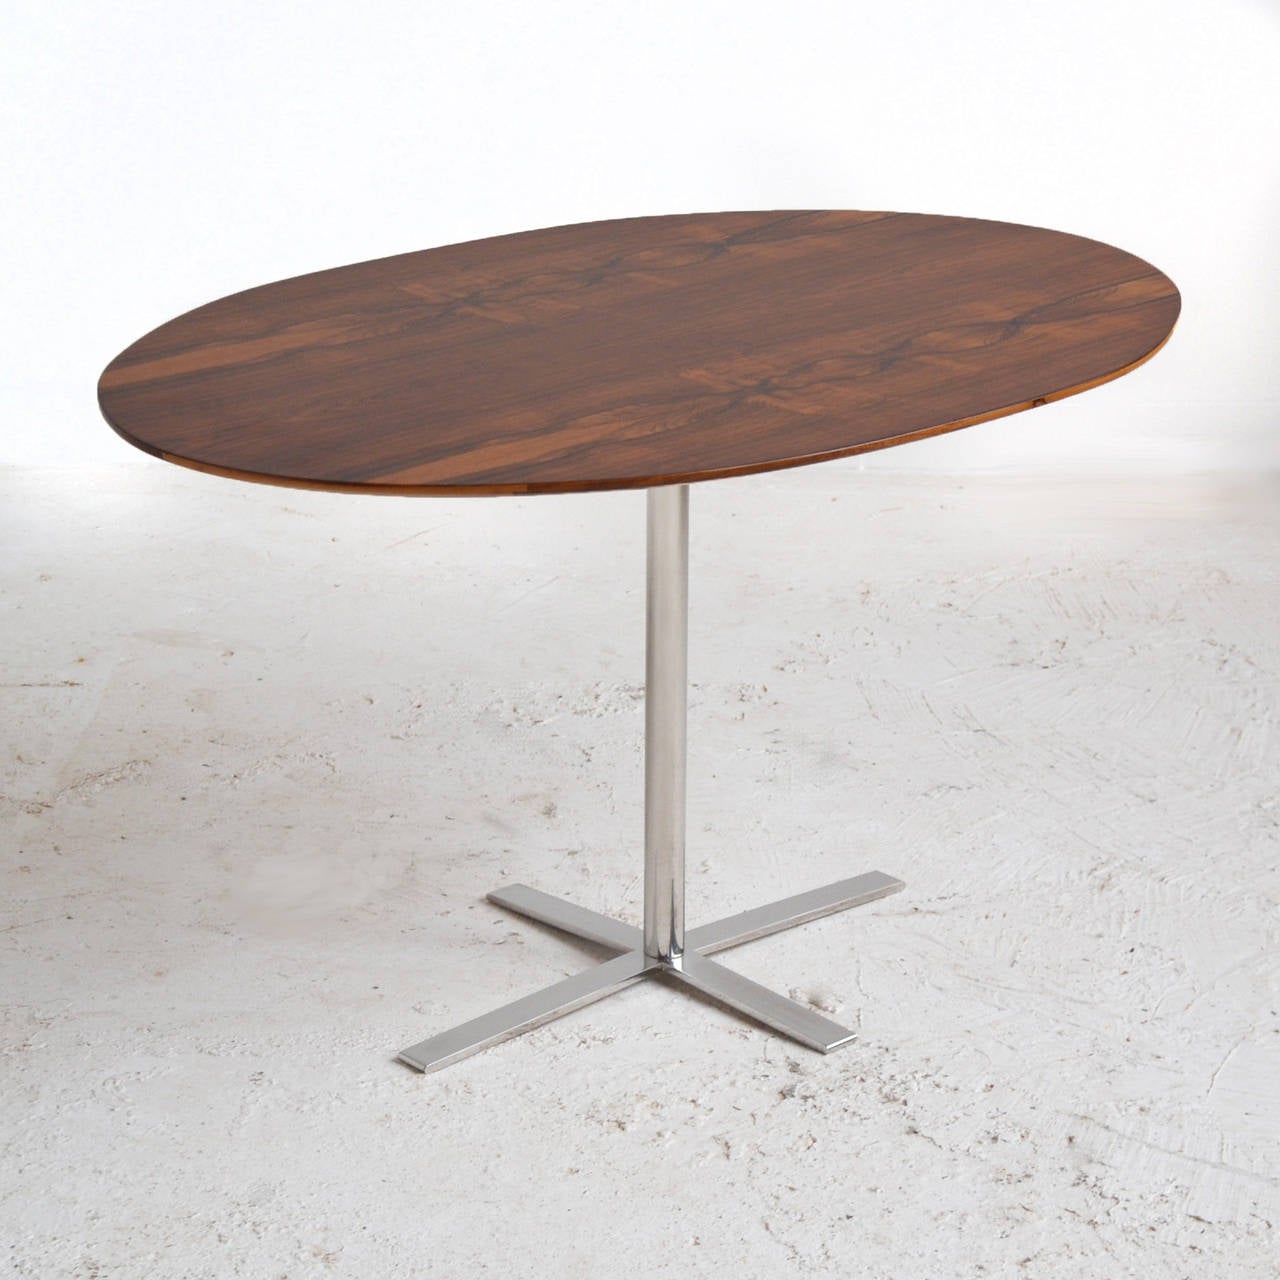 This attractive table features a beautiful oval rosewood top supported by a chrome base with cruciform shaped feet. We have been unable to definitively attribute this piece, but the sophisticated design reminds us of the work of  Arne Jacobsen, Ward